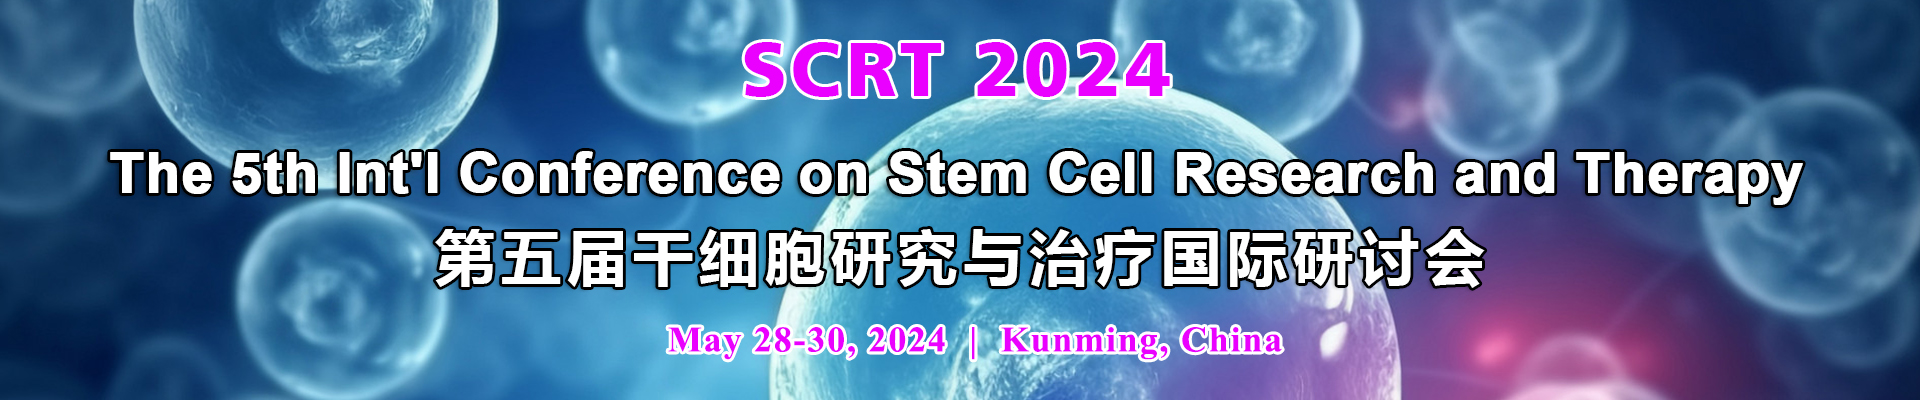 The 5th Int'l Conference on Stem Cell Research and Therapy (SCRT 2024), Kunming, Yunnan, China